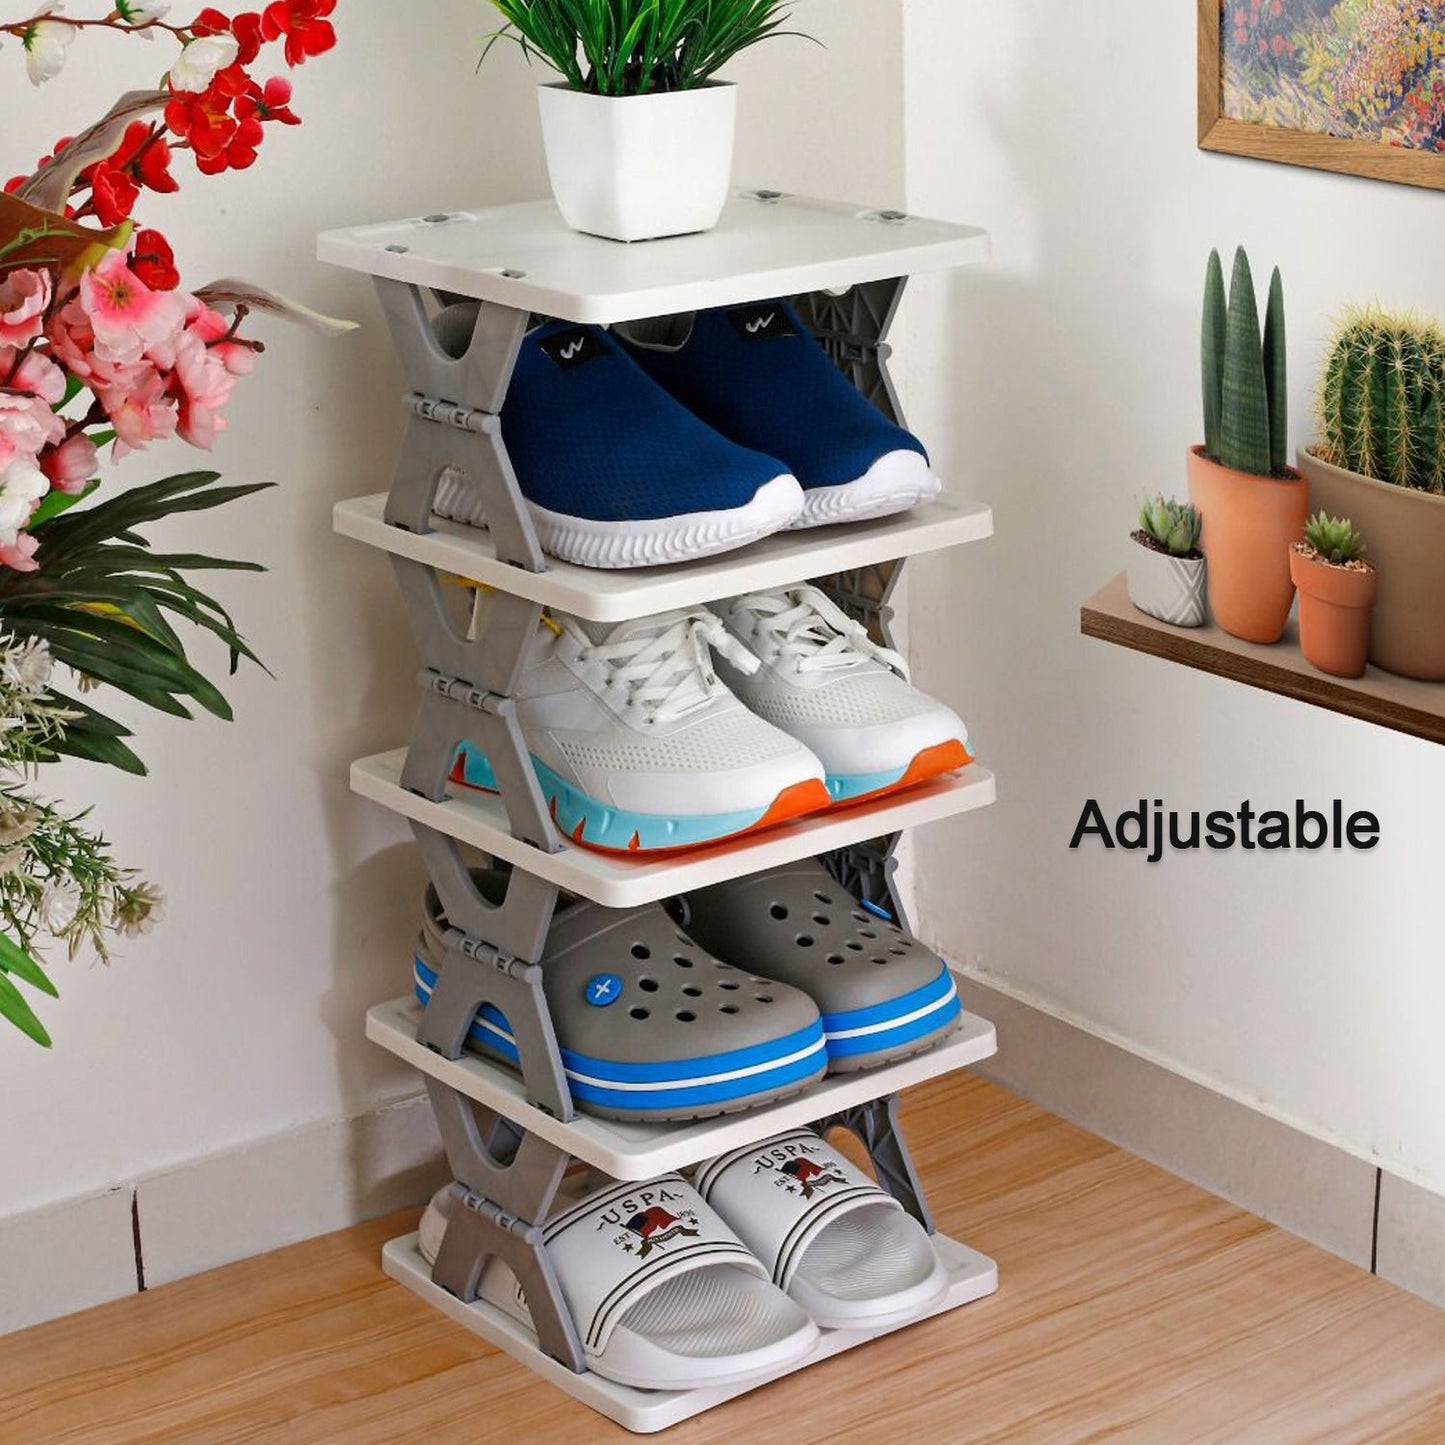 9098  SMART SHOE RACK WITH 8 LAYER SHOES STAND MULTIFUNCTIONAL ENTRYWAY FOLDABLE & COLLAPSIBLE DOOR SHOE RACK FREE STANDING HEAVY DUTY PLASTIC SHOE SHELF STORAGE ORGANIZER NARROW FOOTWEAR HOME